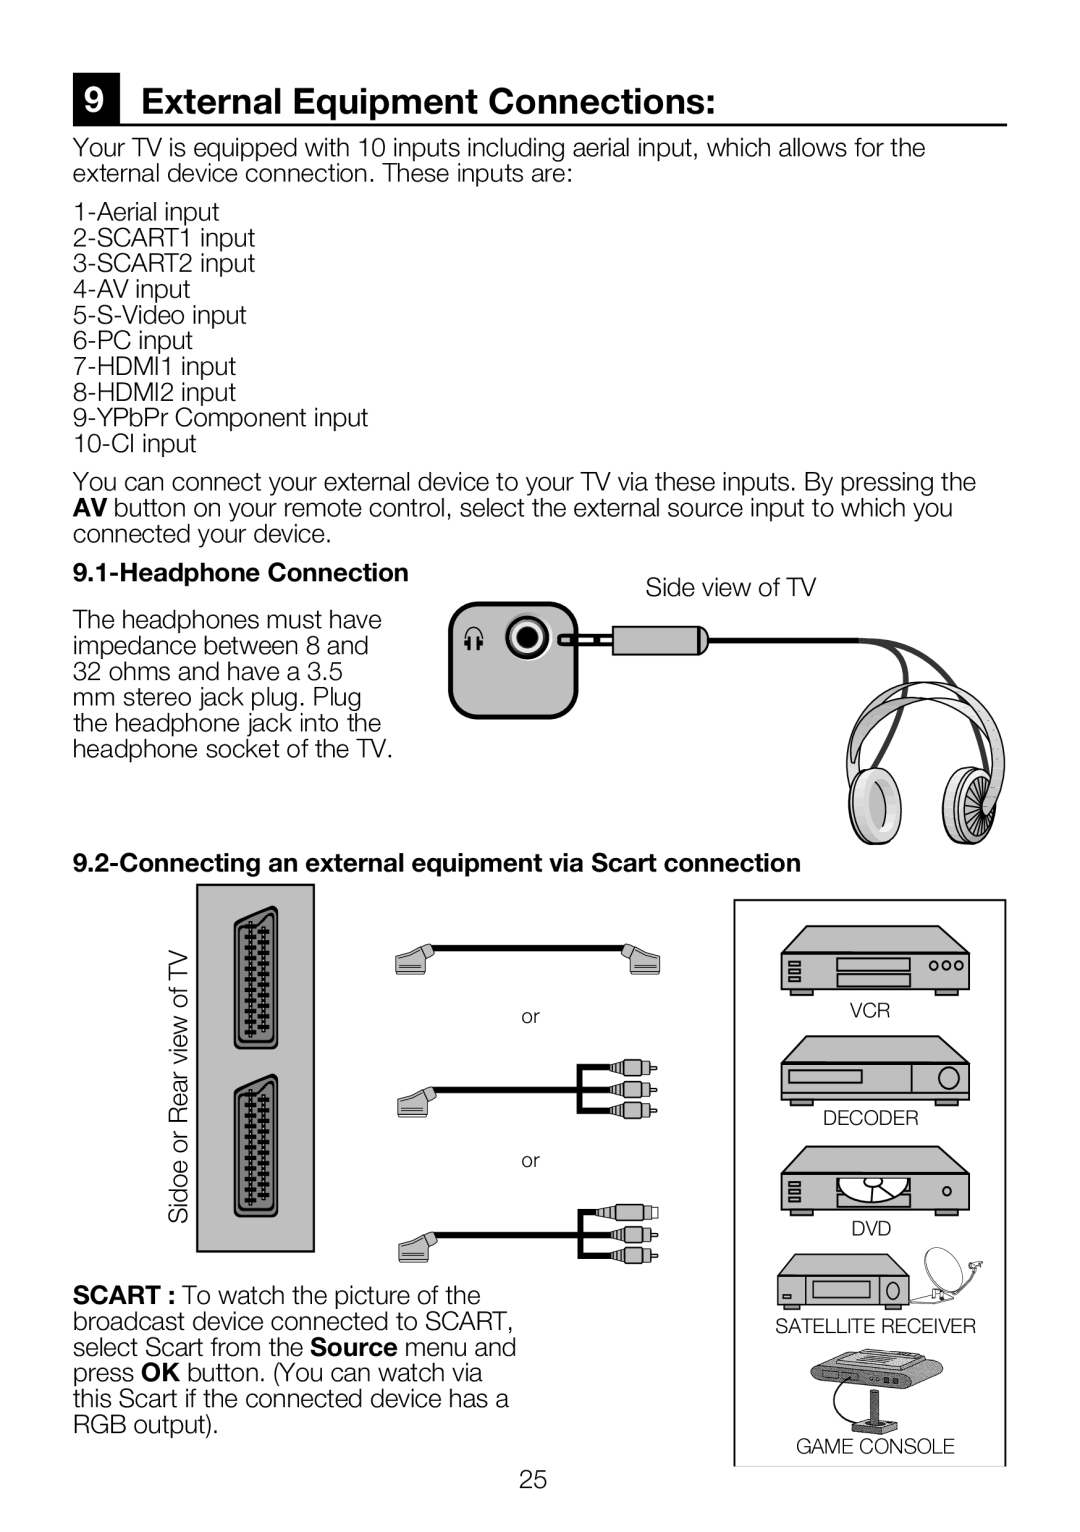 Beko 37WLU550FHID manual External Equipment Connections, Headphone Connection 